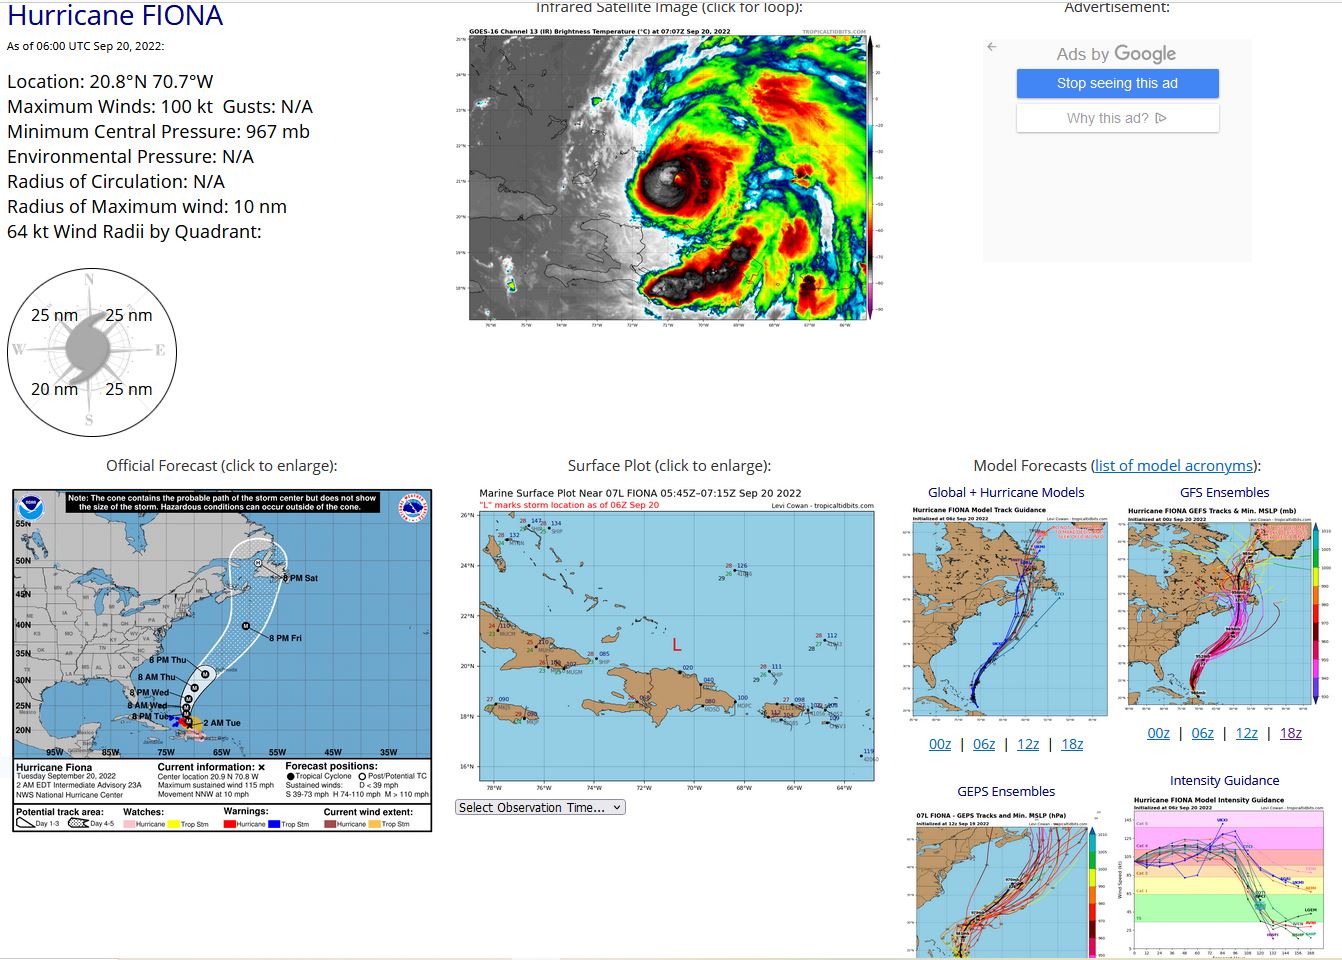 000 WTNT42 KNHC 200253 TCDAT2  Hurricane Fiona Discussion Number  23 NWS National Hurricane Center Miami FL       AL072022 1100 PM EDT Mon Sep 19 2022  The satellite presentation of the hurricane has improved  significantly this evening.  The eye has warmed and become more  distinct and the surrounding ring of deep convection has cooled and  is more symmetric.  More recently, the eye has become smaller in  size and this has also been observed by both NOAA and Air Force  Reserve Hurricane Hunter aircraft that have been sampling the storm  this evening. The aircraft have reported that the eye has shrunk to  around 10 n mi in diameter.  The NOAA plane has measured a peak  flight level wind of 104 kt at around 8000 ft, while the Air Force  aircraft has reported a peak 700-mb flight-level wind of 93 kt.   Peak SFMR winds of 94-96 kt have also been found, and these data  support increasing the initial intensity to 95 kt.   The hurricane's outflow is somewhat restricted over the western portion of the circulation owing to some moderate southwesterly shear of the storm.  Although this shear is not forecast to abate much, the intensity guidance indicates that warm water and a moist atmosphere should allow for continued intensification during the next 24 to 48 hours.  Given the recent improvement in structure, the updated NHC intensity forecast calls for a slightly faster rate of strengthening during the next 12 to 24 hours, and it is at the upper end of the intensity guidance.  The official forecast shows Fiona becoming a major hurricane overnight, and brings the hurricane to category 4 status in a day or so.  Eyewall replacement cycles are likely to cause some fluctuations in intensity in the 24-72 h time period.  By day 4, the hurricane is forecast to interact with a strong mid-tropospheric trough, which will start the system's extratropical transition.  The process is forecast to  be complete by the end of the period, and Fiona is expected to  remain a powerful extratropical cyclone through day 5.   The initial motion estimate is 330/9 kt. There track forecast  philosophy again remains the same as the previous few forecast  cycles. The hurricane should gradually turn north while moving  around the western periphery of a mid-level ridge. After 72 hours,   Fiona is forecast to turn north-northeastward and accelerate as a  strong mid-level trough nears the northeastern United States. The  track guidance remains tightly clustered and the NHC forecast is  similar to the previous advisory, near the middle of the guidance  envelope.   Key Messages:  1.  Heavy rains from Fiona will continue across parts of Puerto Rico  and across northern and eastern Dominican Republic through tonight.  These rainfall amounts will continue to produce life-threatening  and catastrophic flooding along with mudslides and landslides  across Puerto Rico. Life-threatening flash and urban flooding is  likely for eastern portions of the Dominican Republic.  2. Hurricane conditions are expected over the Turks and Caicos, with tropical storm conditions over the southeastern Bahamas, beginning late tonight or early Tuesday.  3.  Interests in Bermuda should monitor the progress of Fiona.   FORECAST POSITIONS AND MAX WINDS  INIT  20/0300Z 20.6N  70.3W   95 KT 110 MPH  12H  20/1200Z 21.8N  71.0W  110 KT 125 MPH  24H  21/0000Z 23.3N  71.4W  115 KT 130 MPH  36H  21/1200Z 24.6N  71.4W  120 KT 140 MPH  48H  22/0000Z 26.3N  71.0W  120 KT 140 MPH  60H  22/1200Z 28.5N  69.9W  120 KT 140 MPH  72H  23/0000Z 31.1N  68.0W  115 KT 130 MPH  96H  24/0000Z 39.8N  60.7W  105 KT 120 MPH 120H  25/0000Z 49.7N  58.5W   65 KT  75 MPH...POST-TROP/EXTRATROP  $$ Forecaster Brown